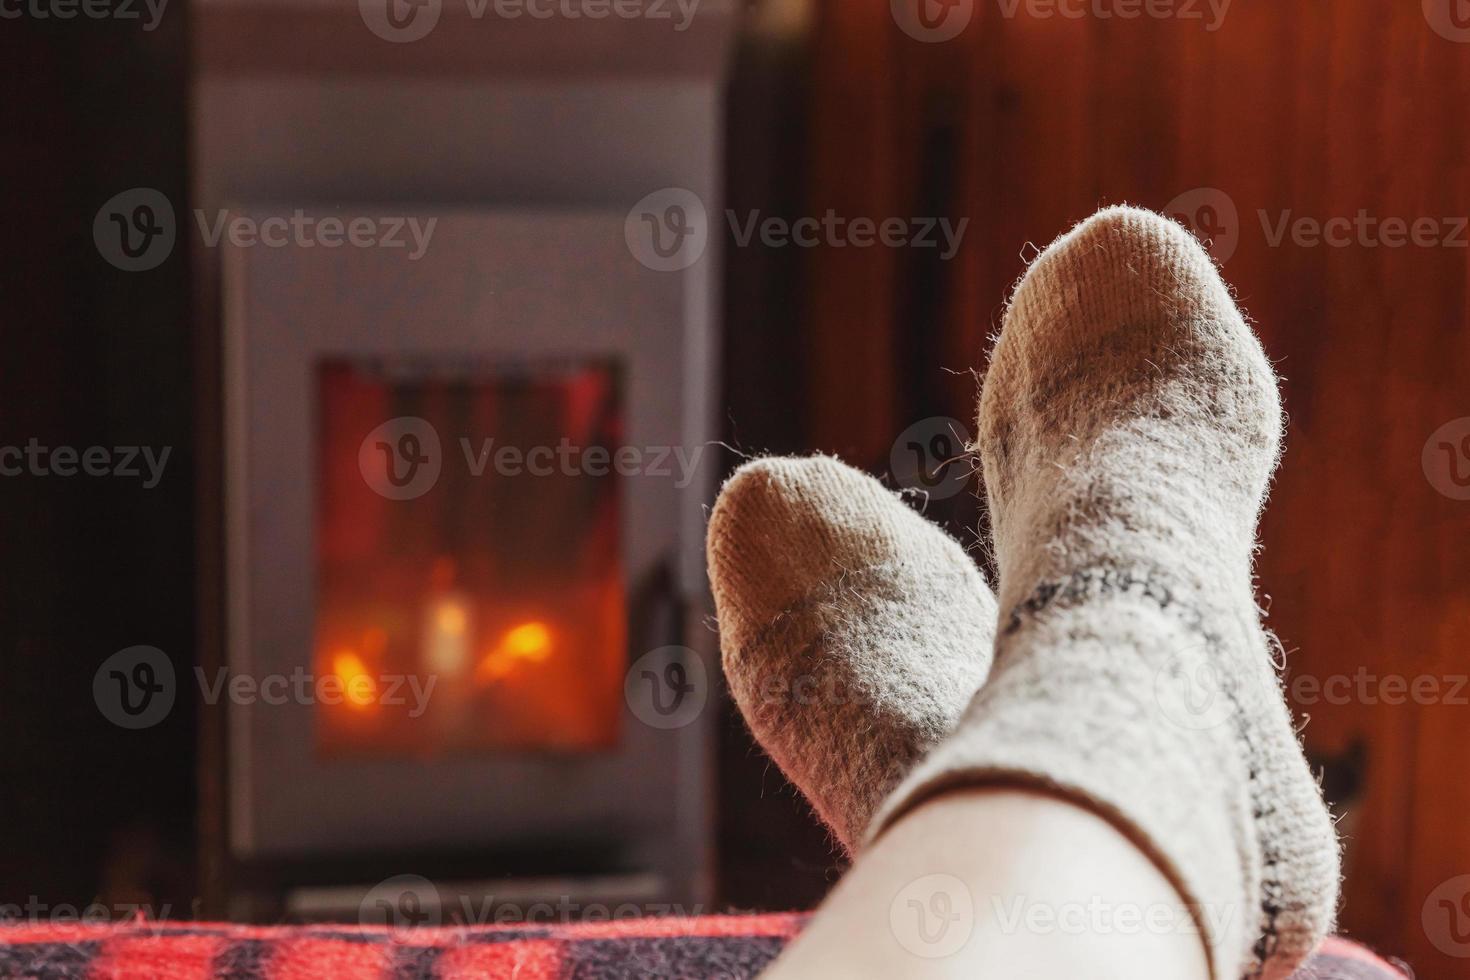 Feet legs in winter clothes wool socks at fireplace background. Woman sitting at home on winter or autumn evening relaxing and warming up. Winter and cold weather concept. Hygge Christmas eve. photo